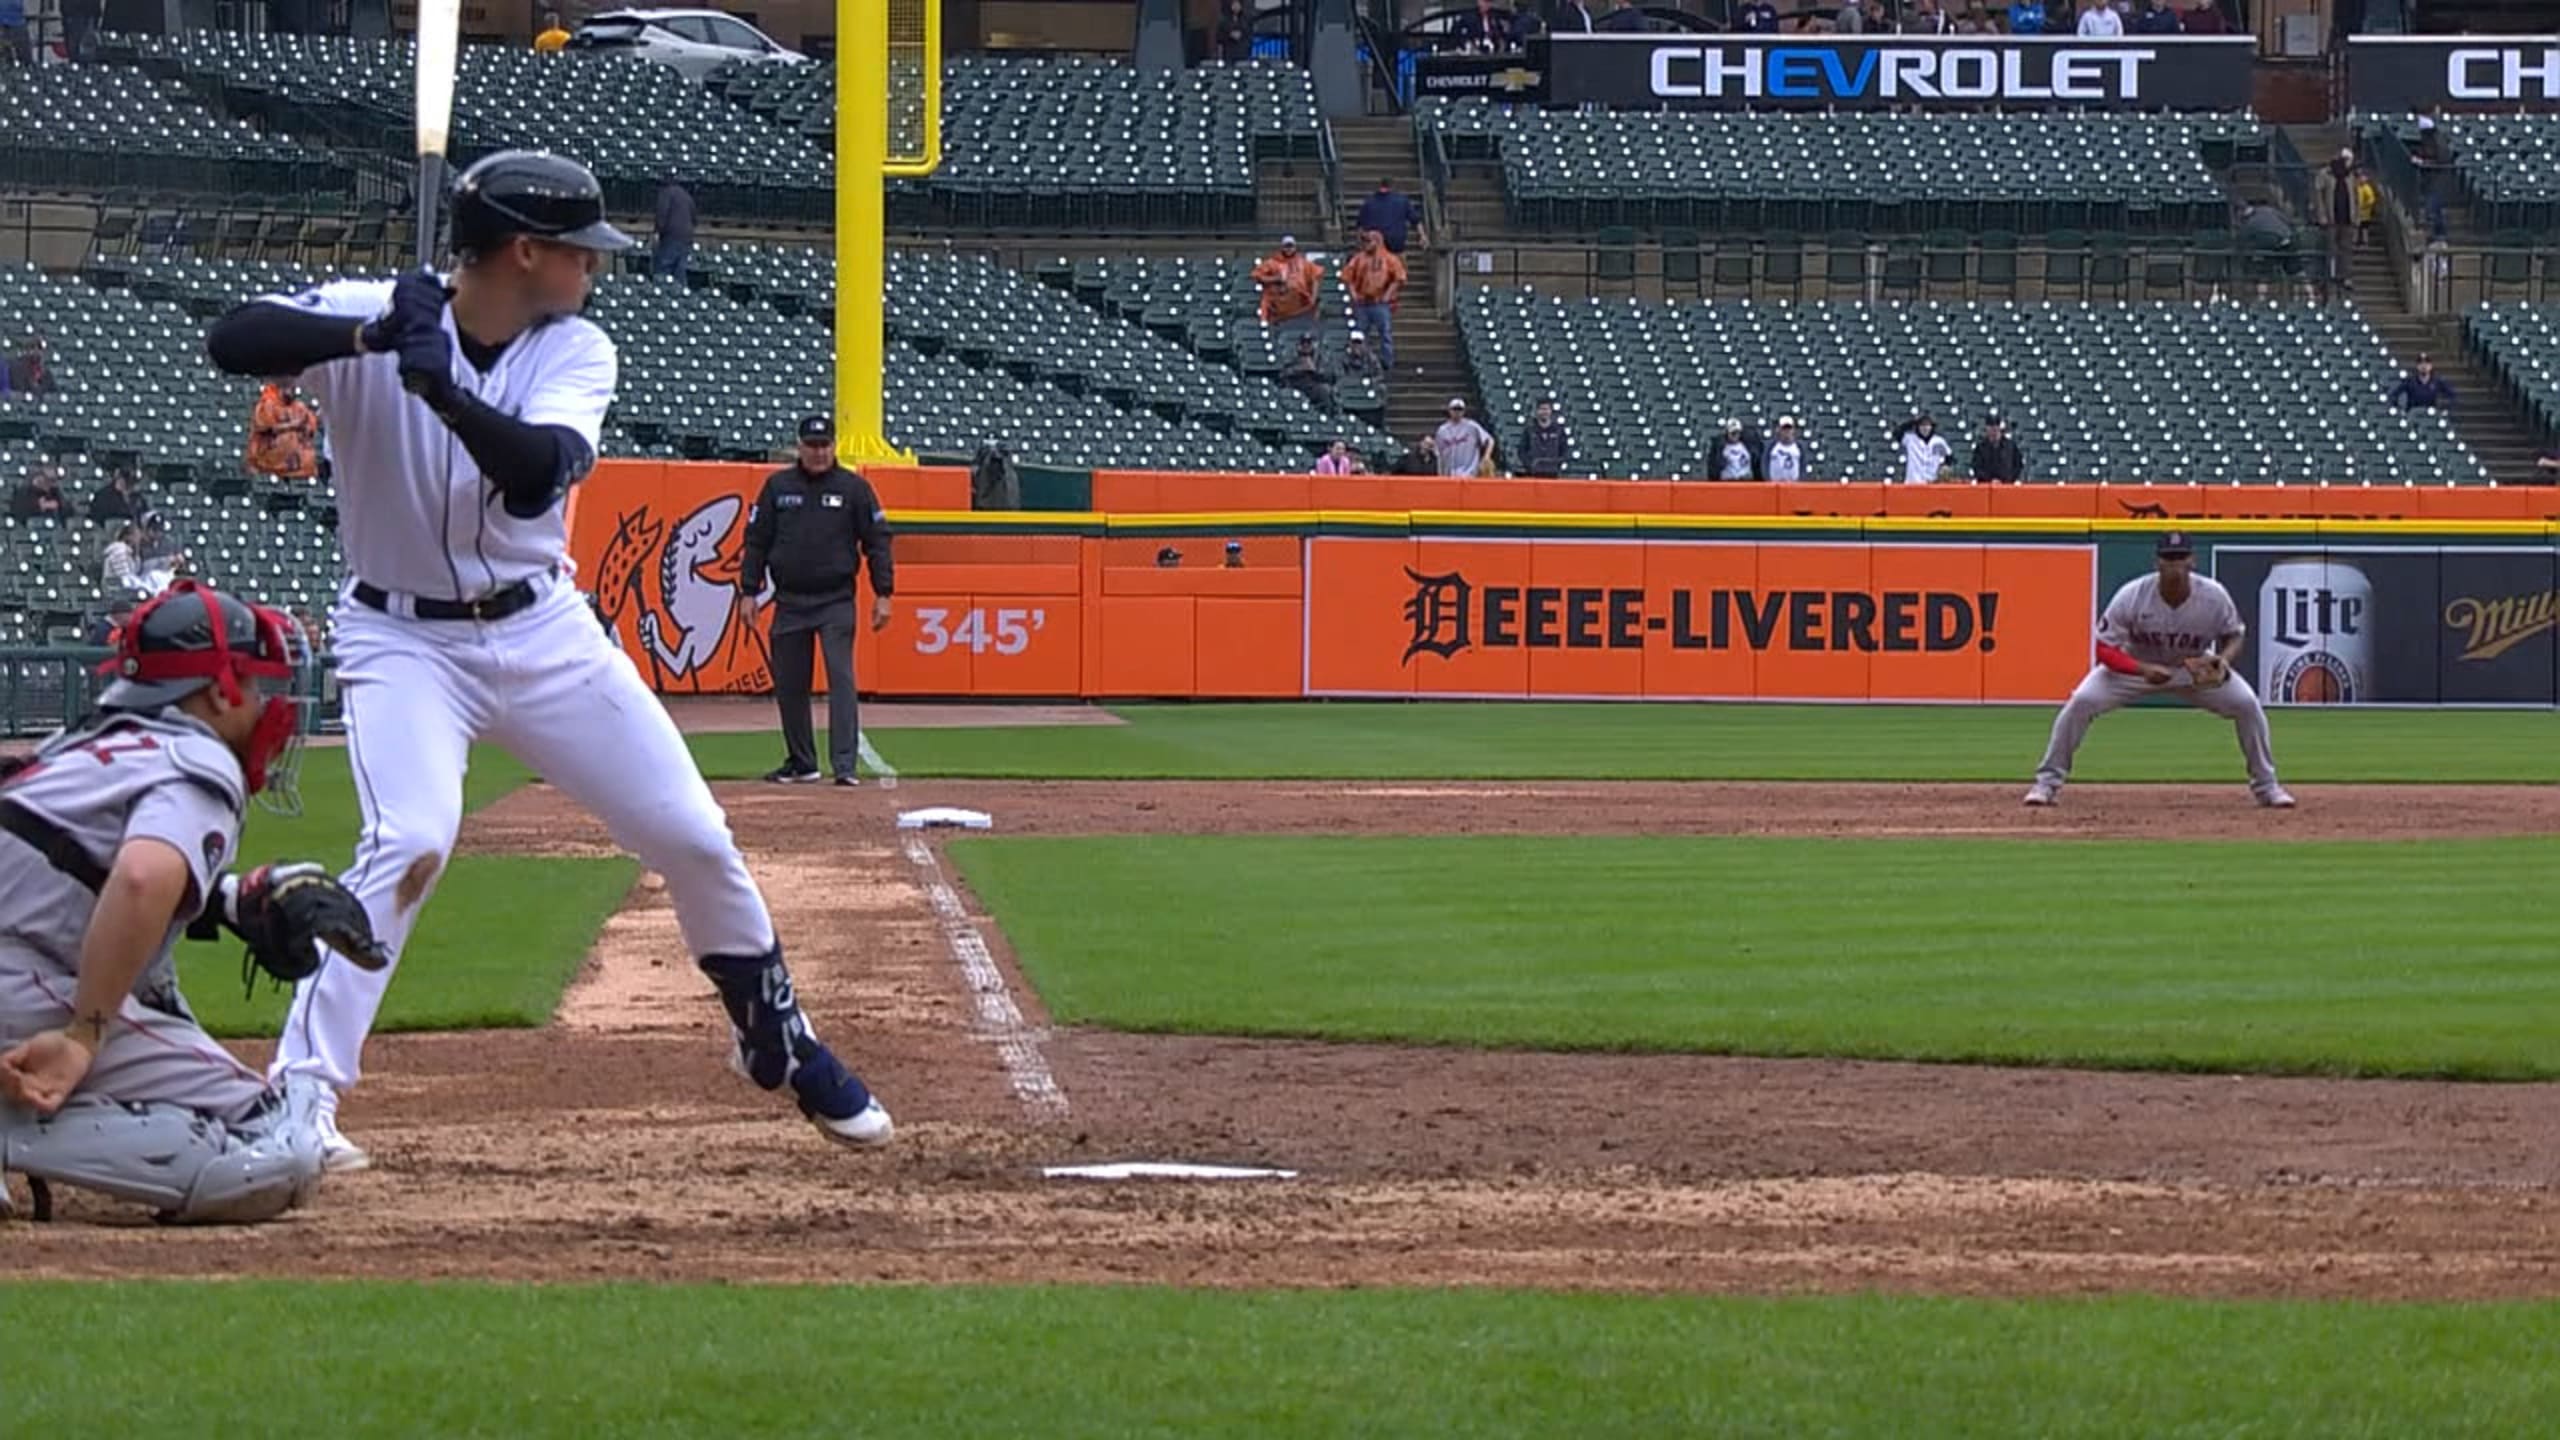 Tigers rookie Spencer Torkelson hits first career MLB home run at